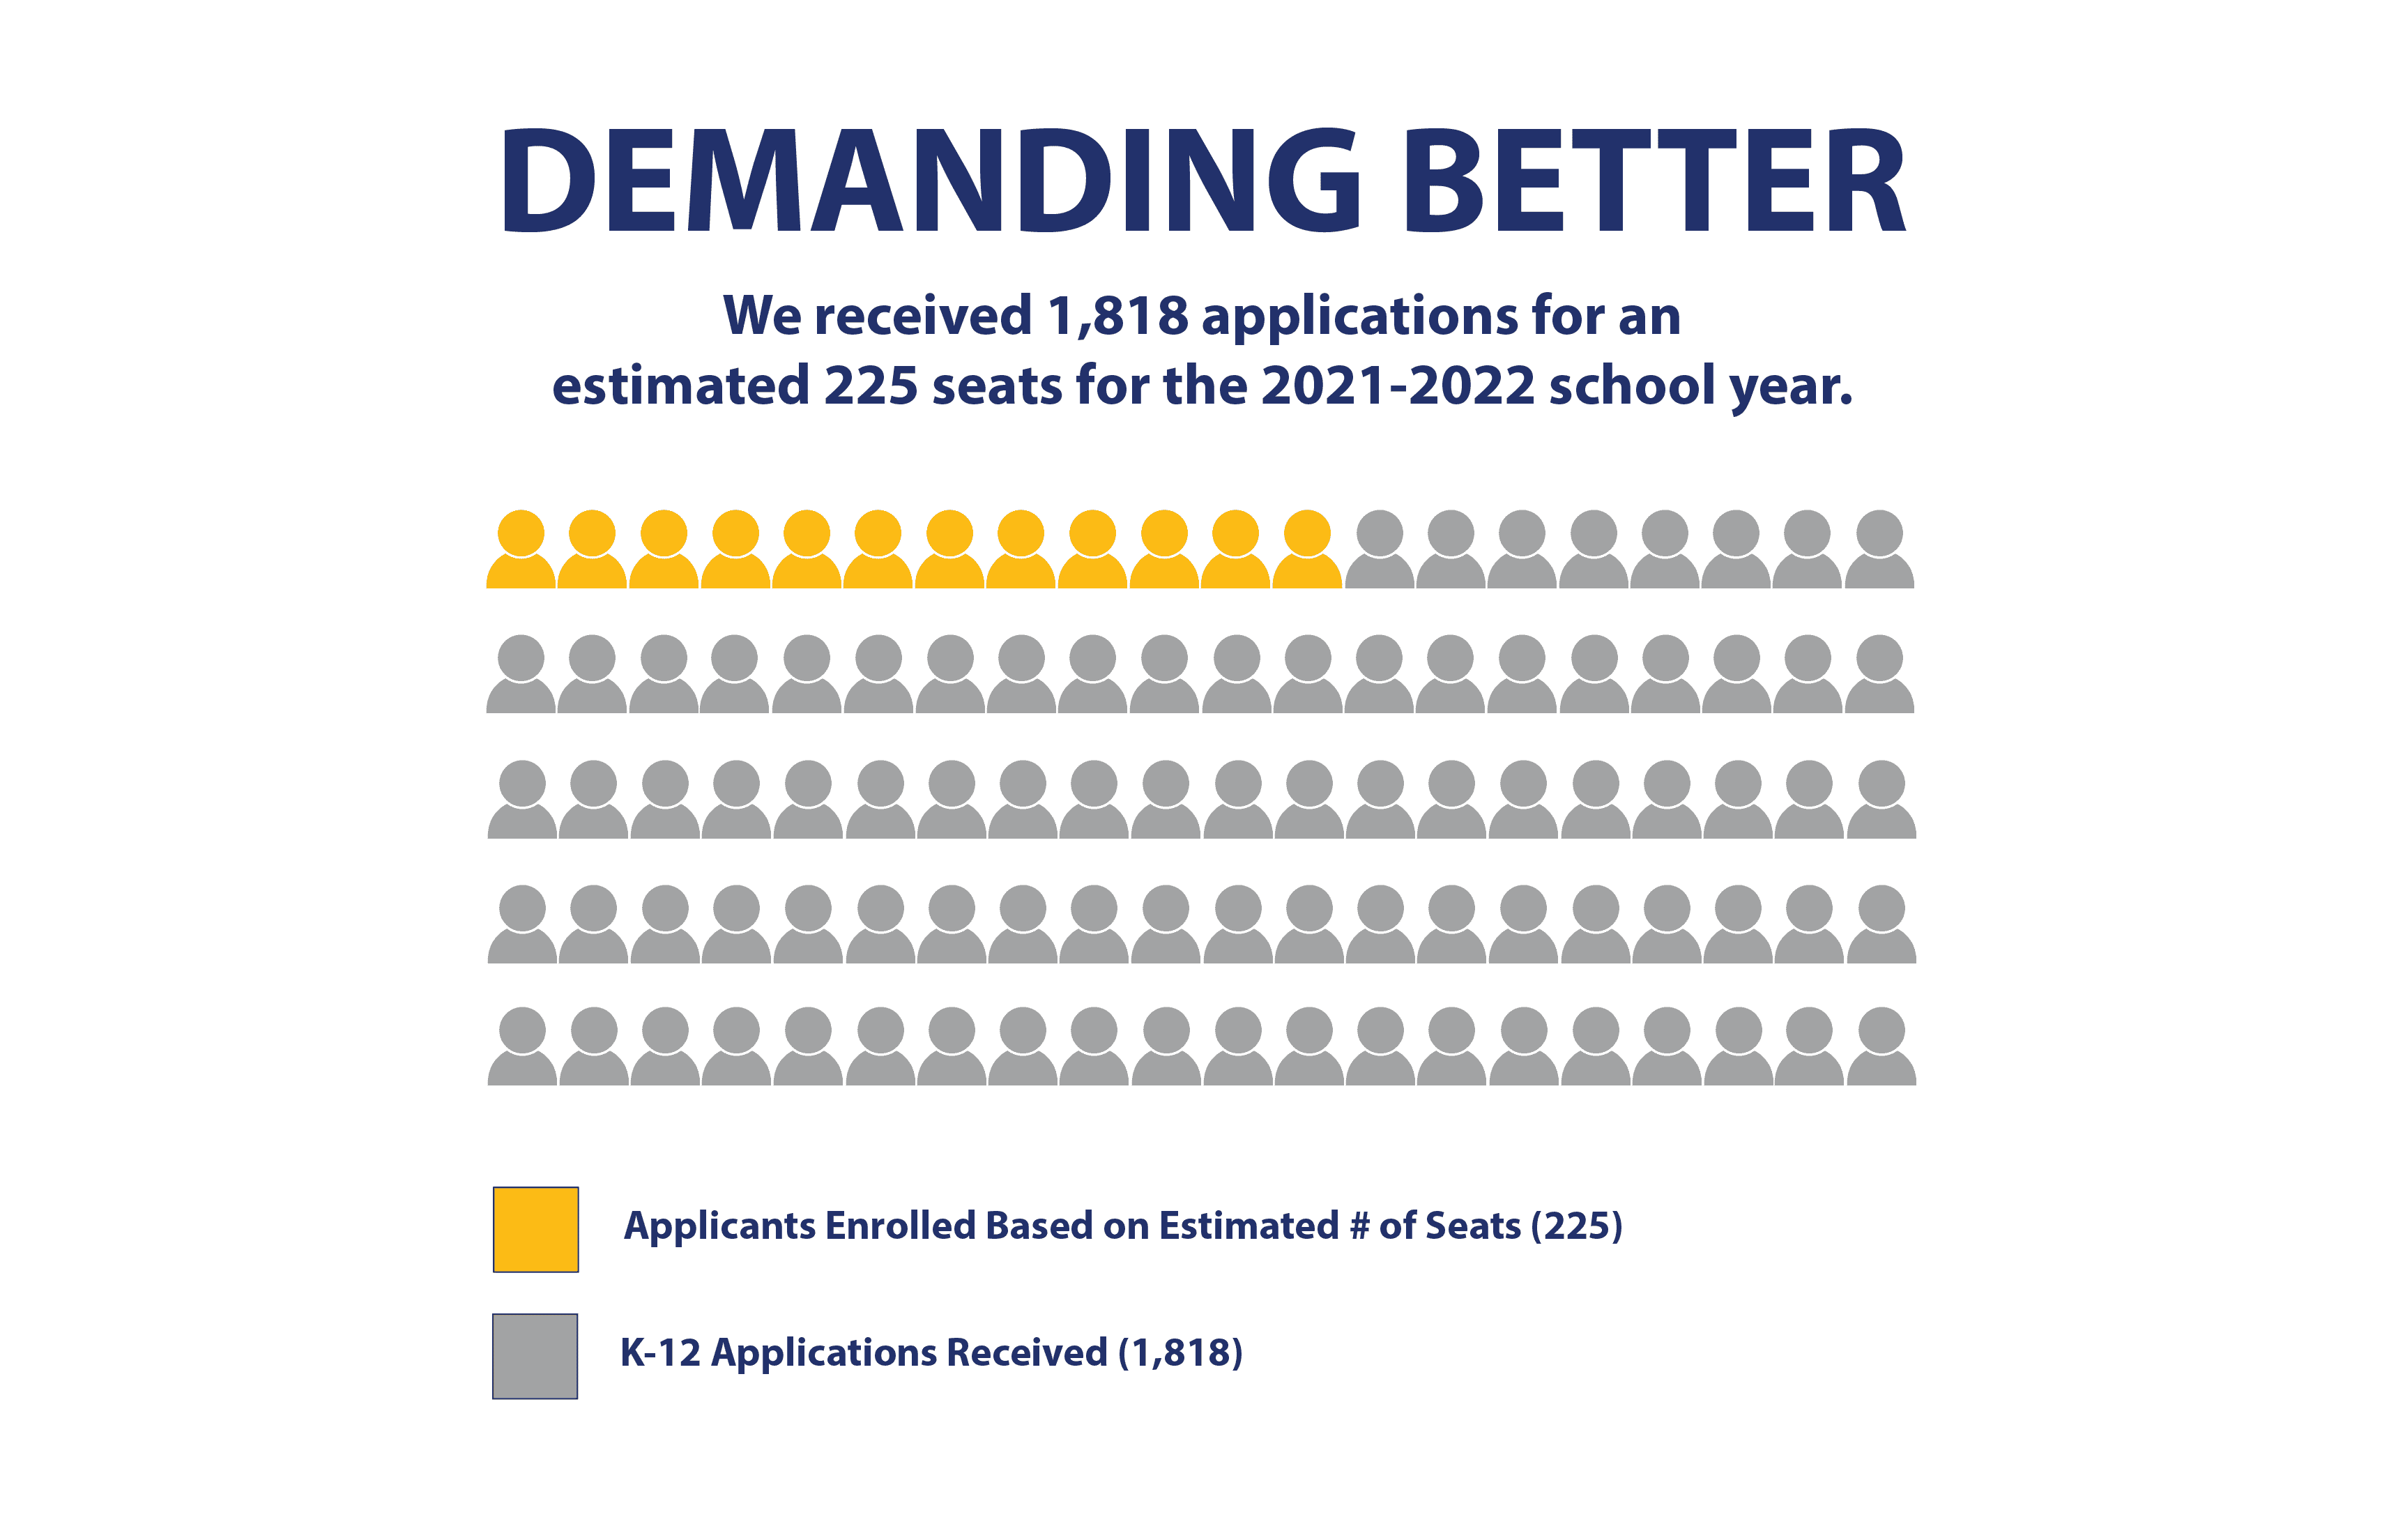 We received 1,818 applications for 225 seats for the 2021-2022 school year